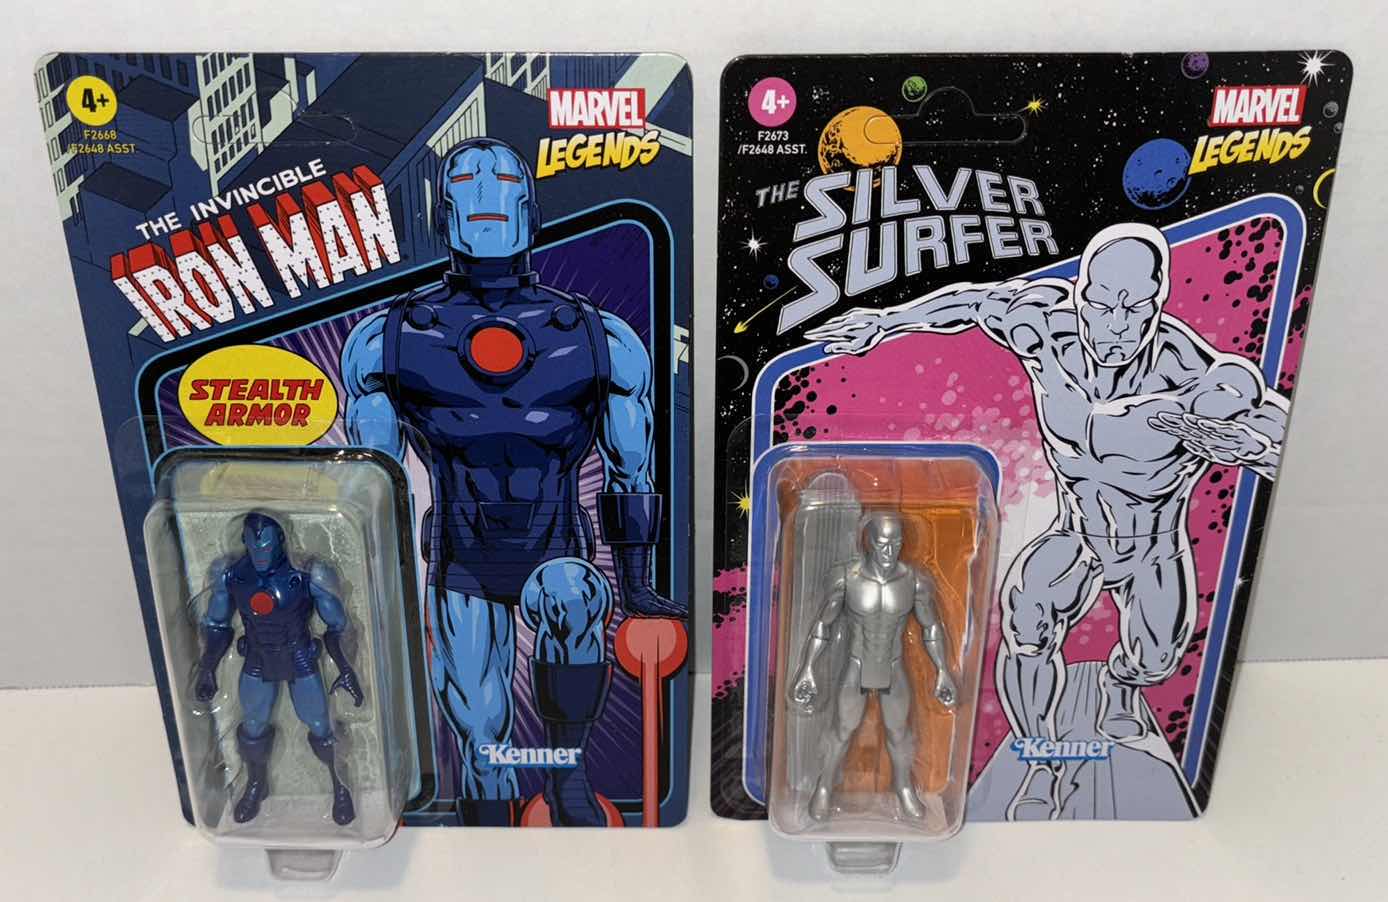 Photo 1 of NEW HASBRO KENNER MARVEL LEGENDS RETRO COLLECTION 3.75” ACTION FIGURES 2-PACK, THE INVINCIBLE ITON MAN “STEALTH ARMOR” & “THE SILVER SURFER”